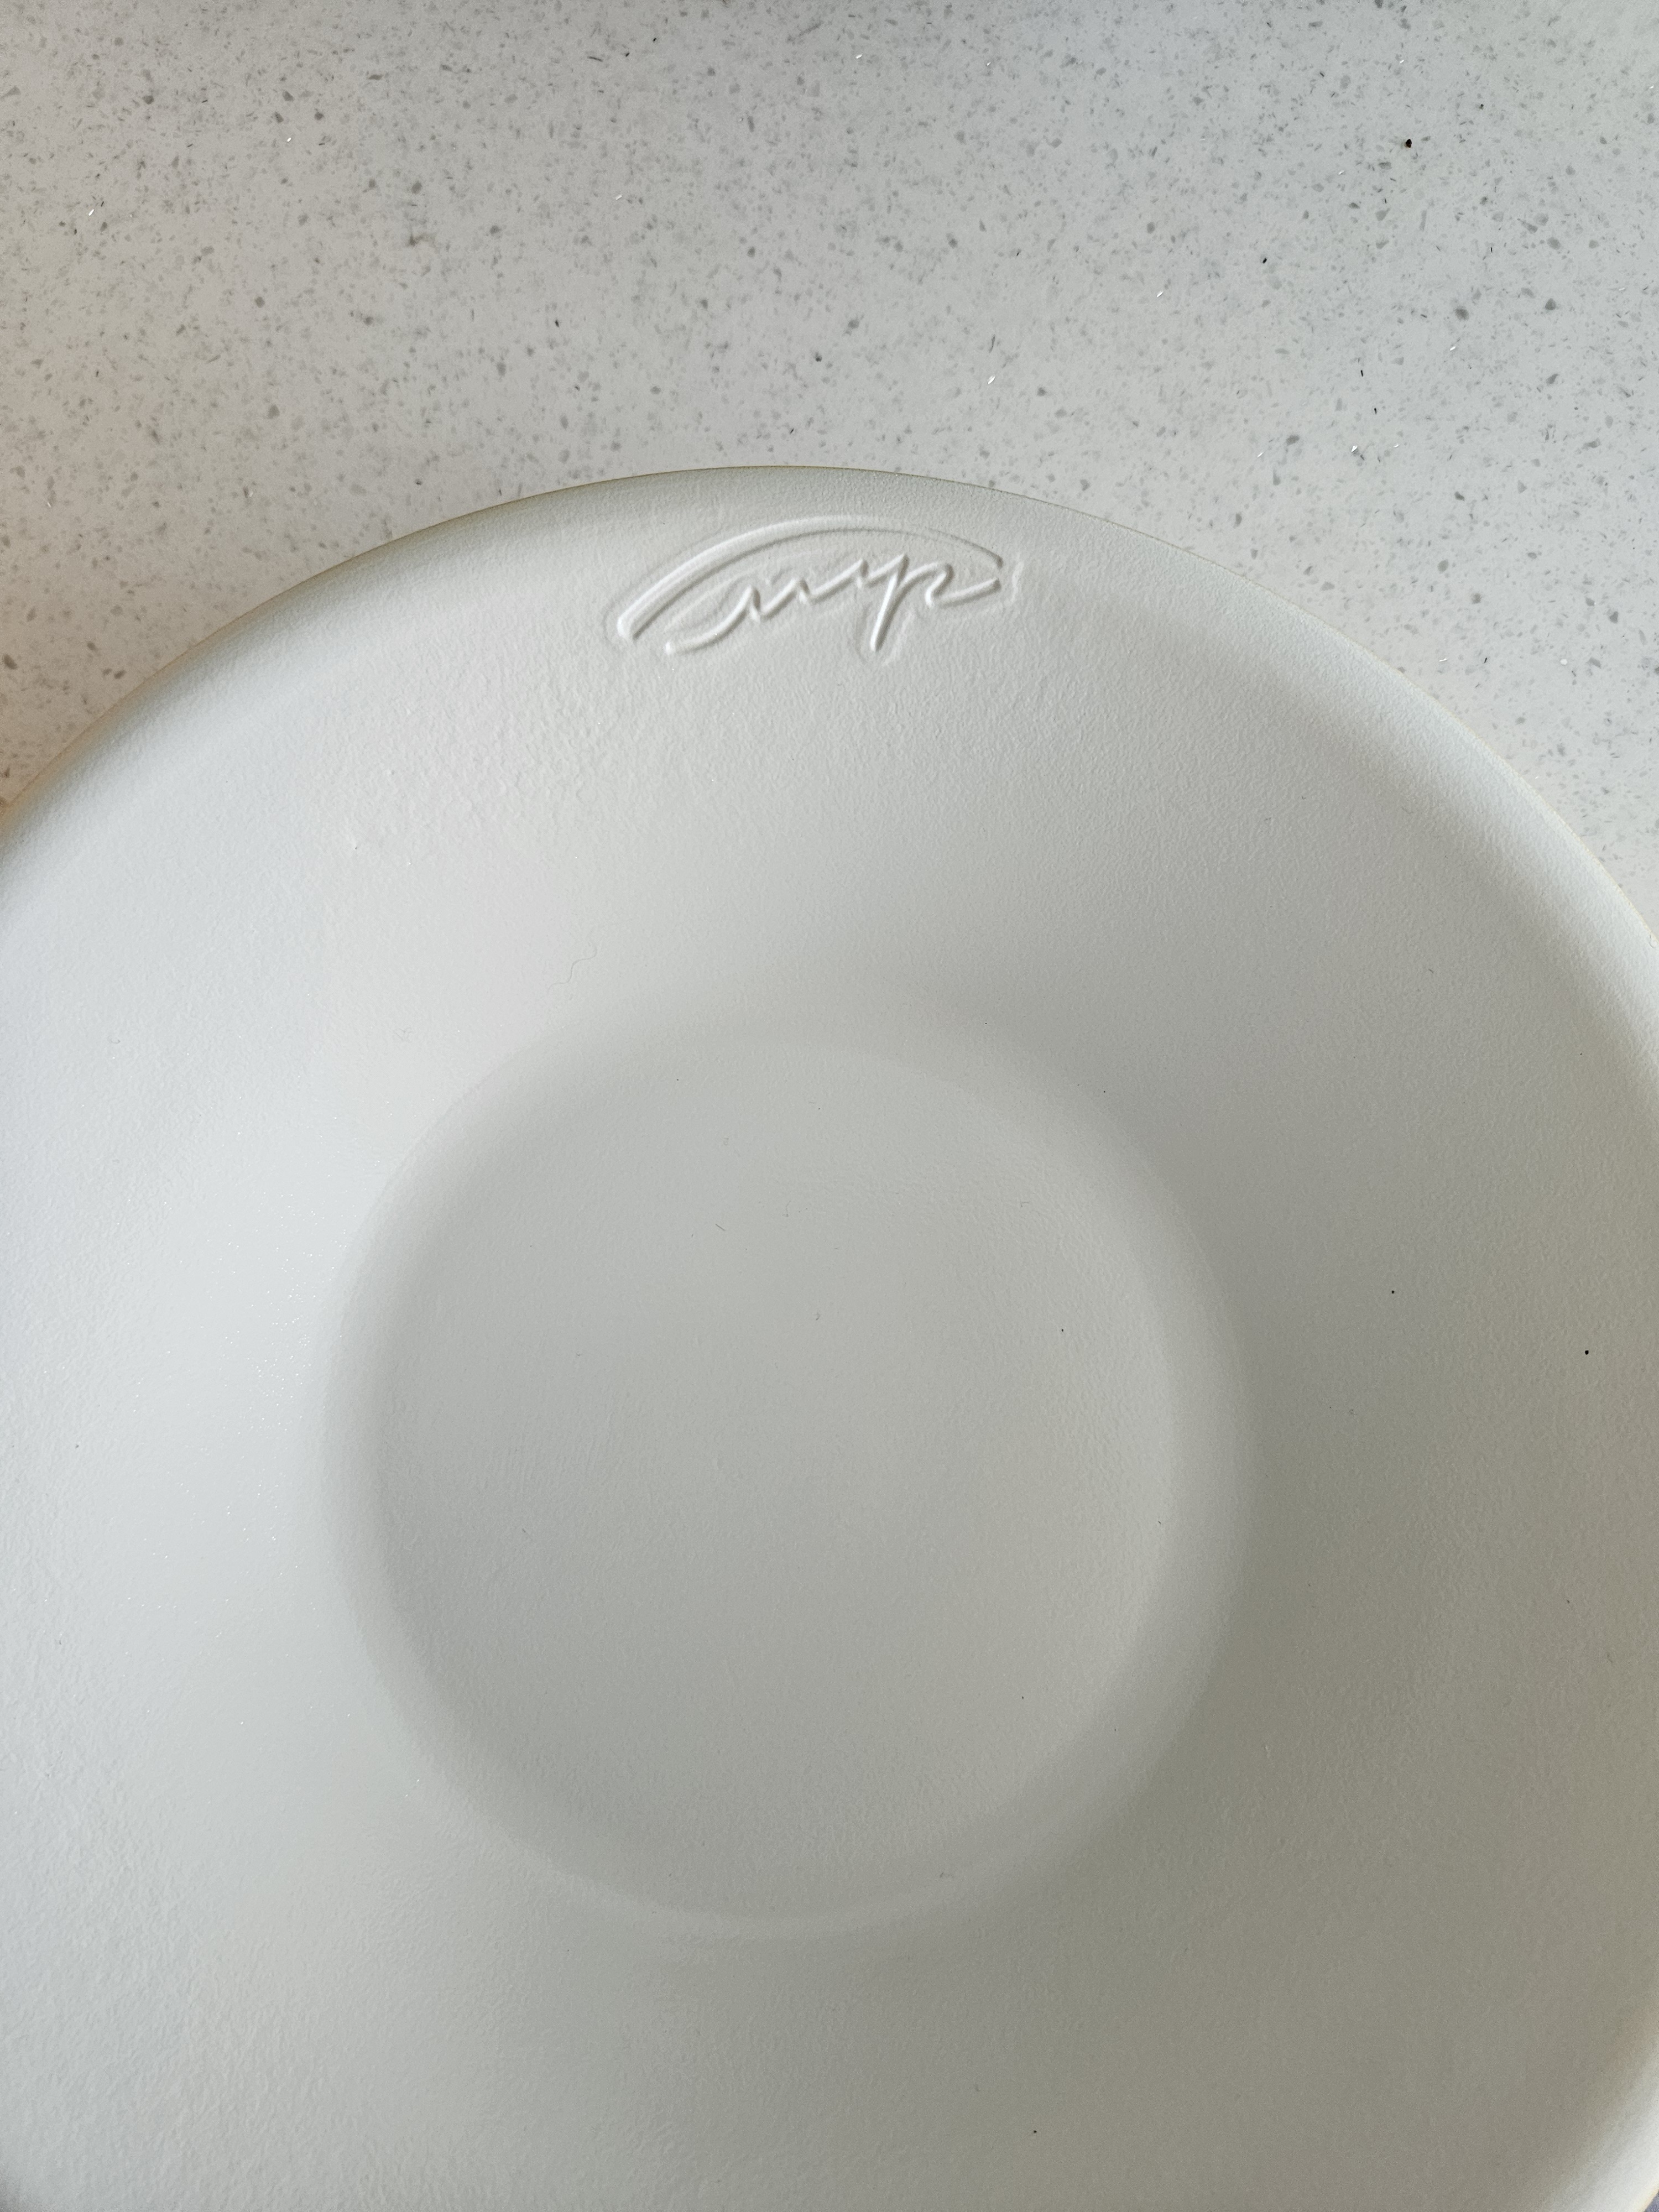 a white plate on a counter